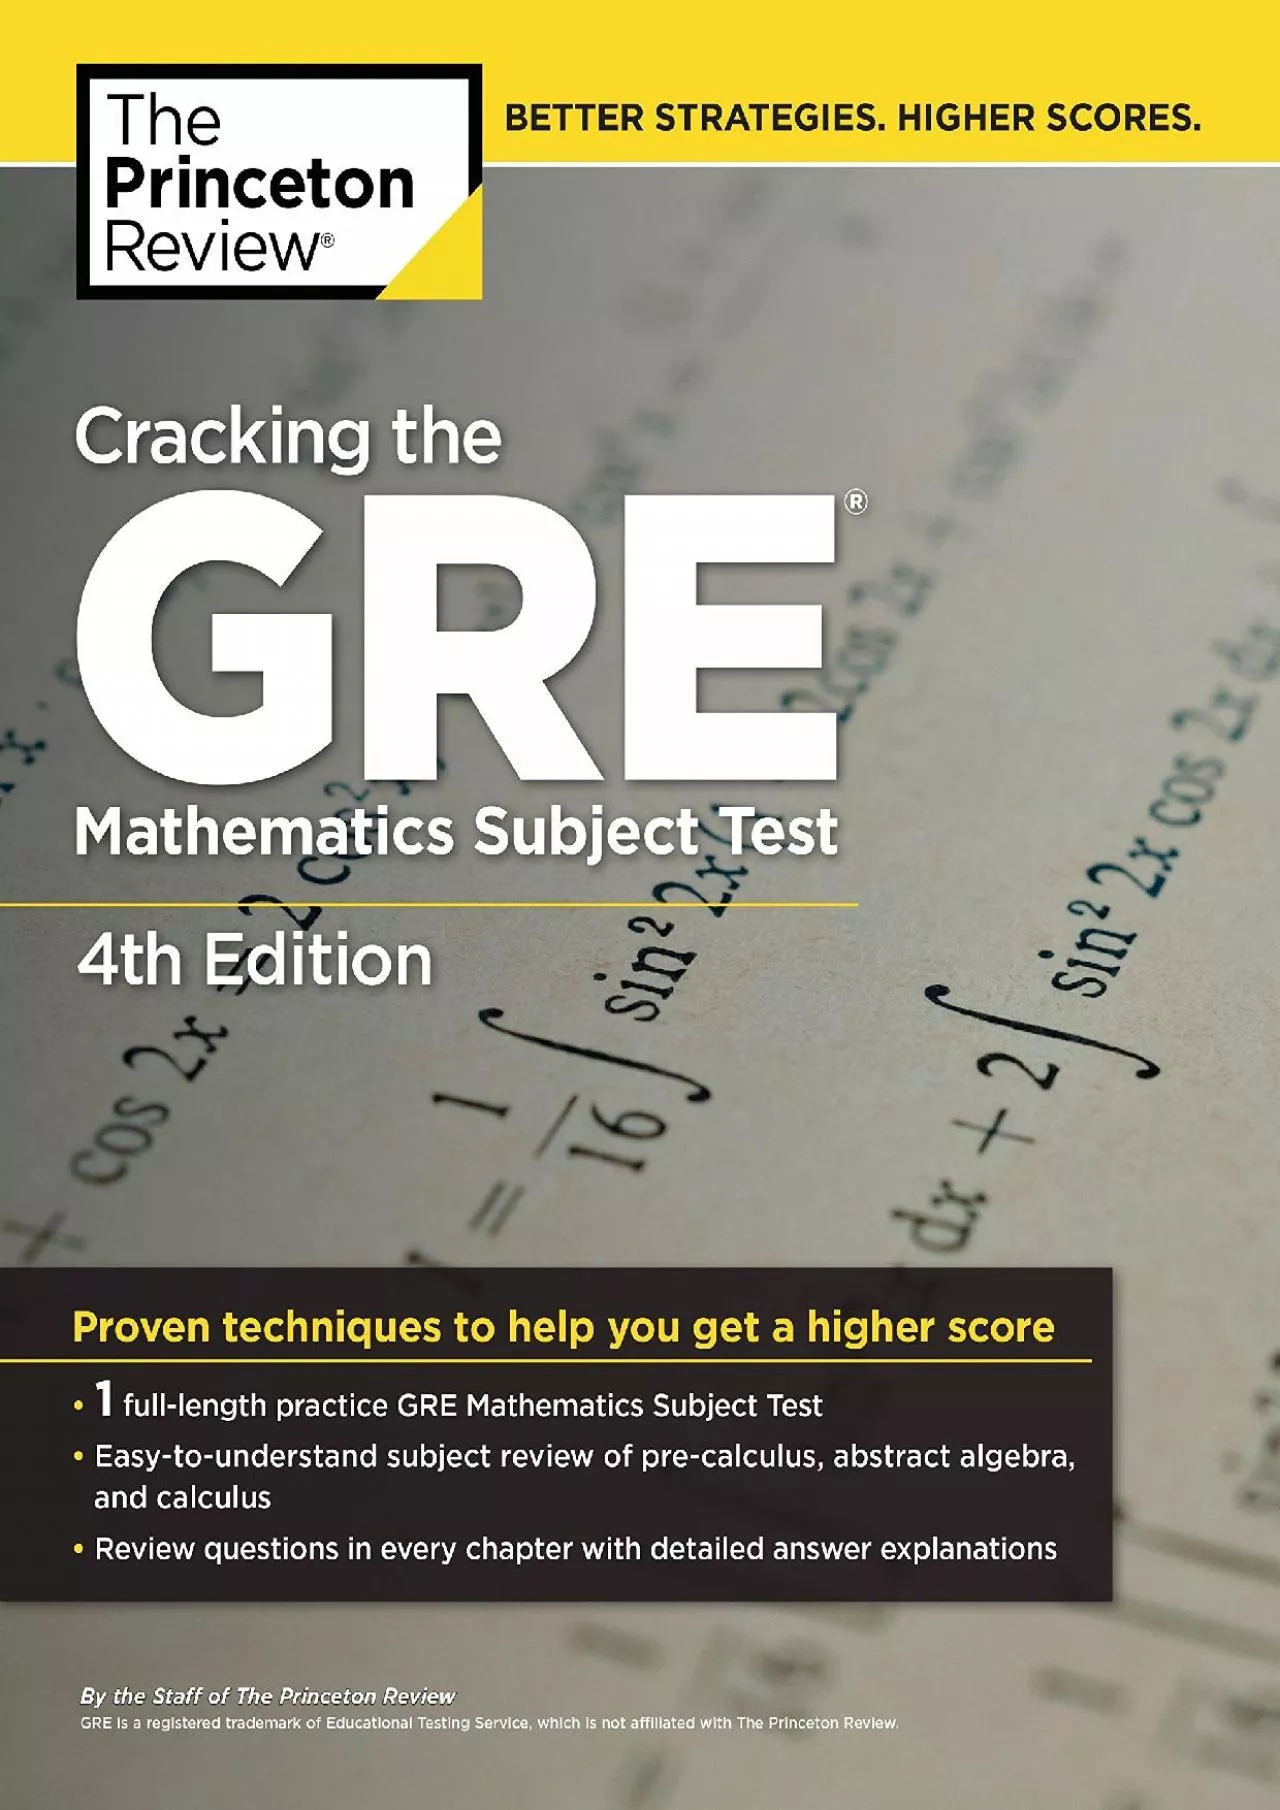 [EBOOK] Cracking the GRE Mathematics Subject Test, 4th Edition